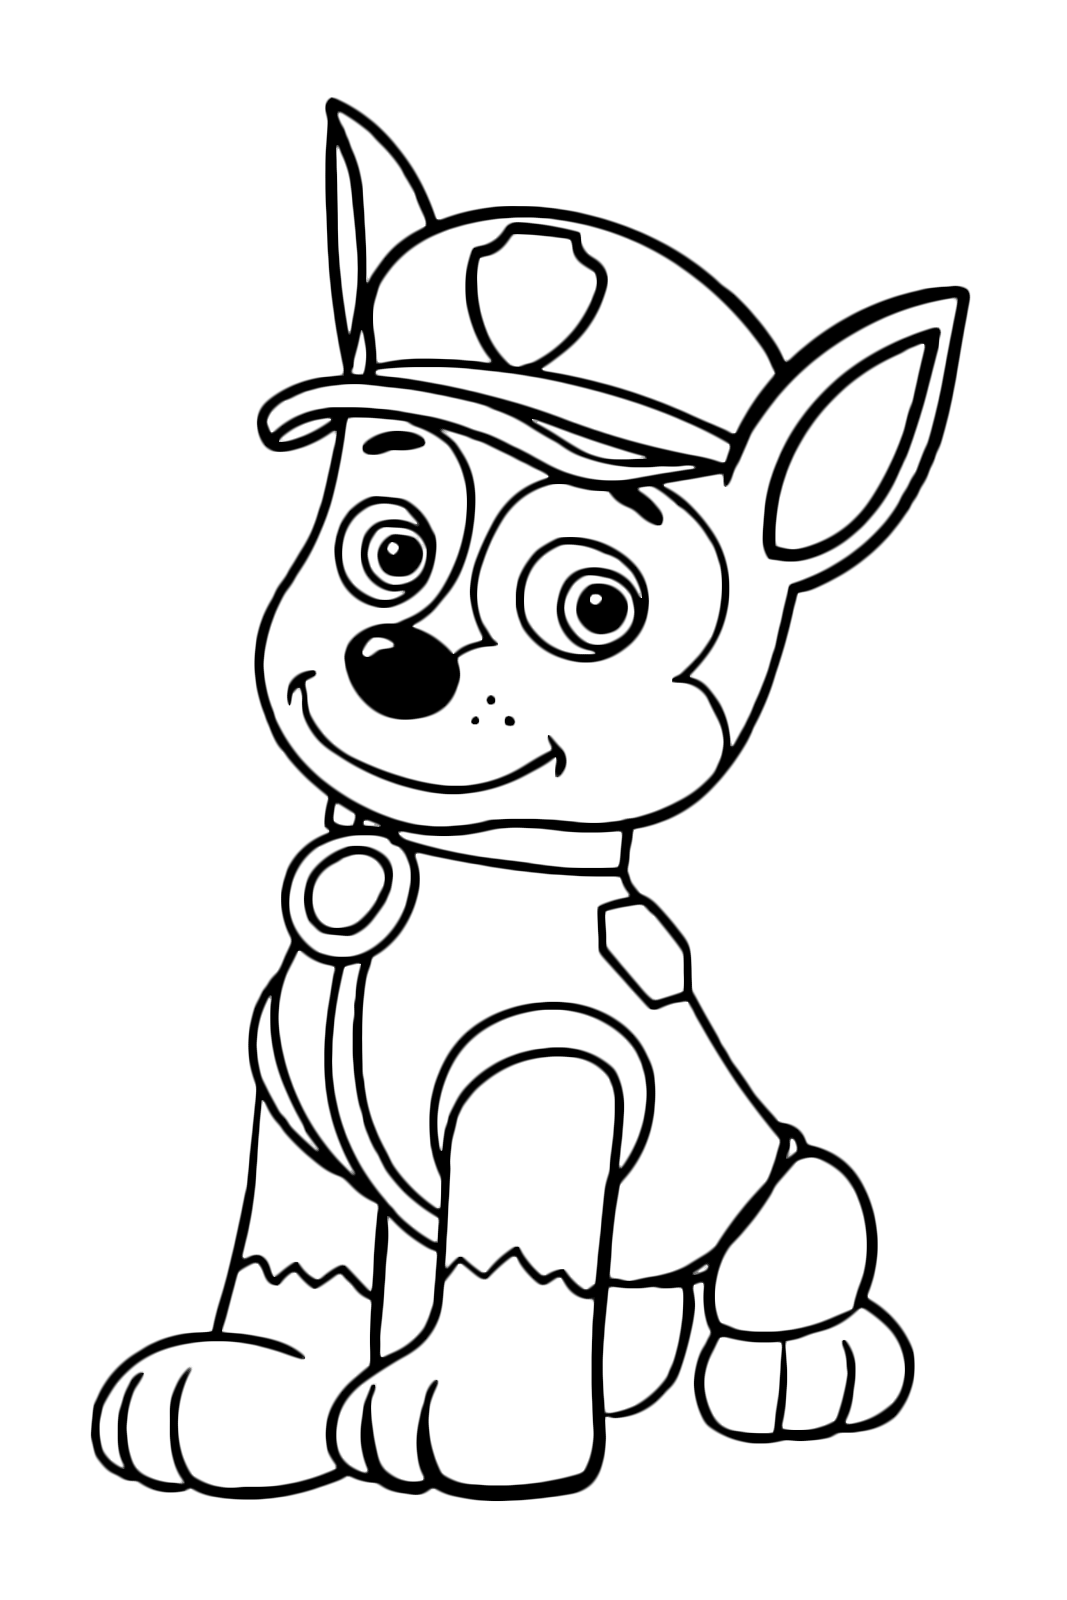 PAW Patrol Chase the police dog is resting sitting